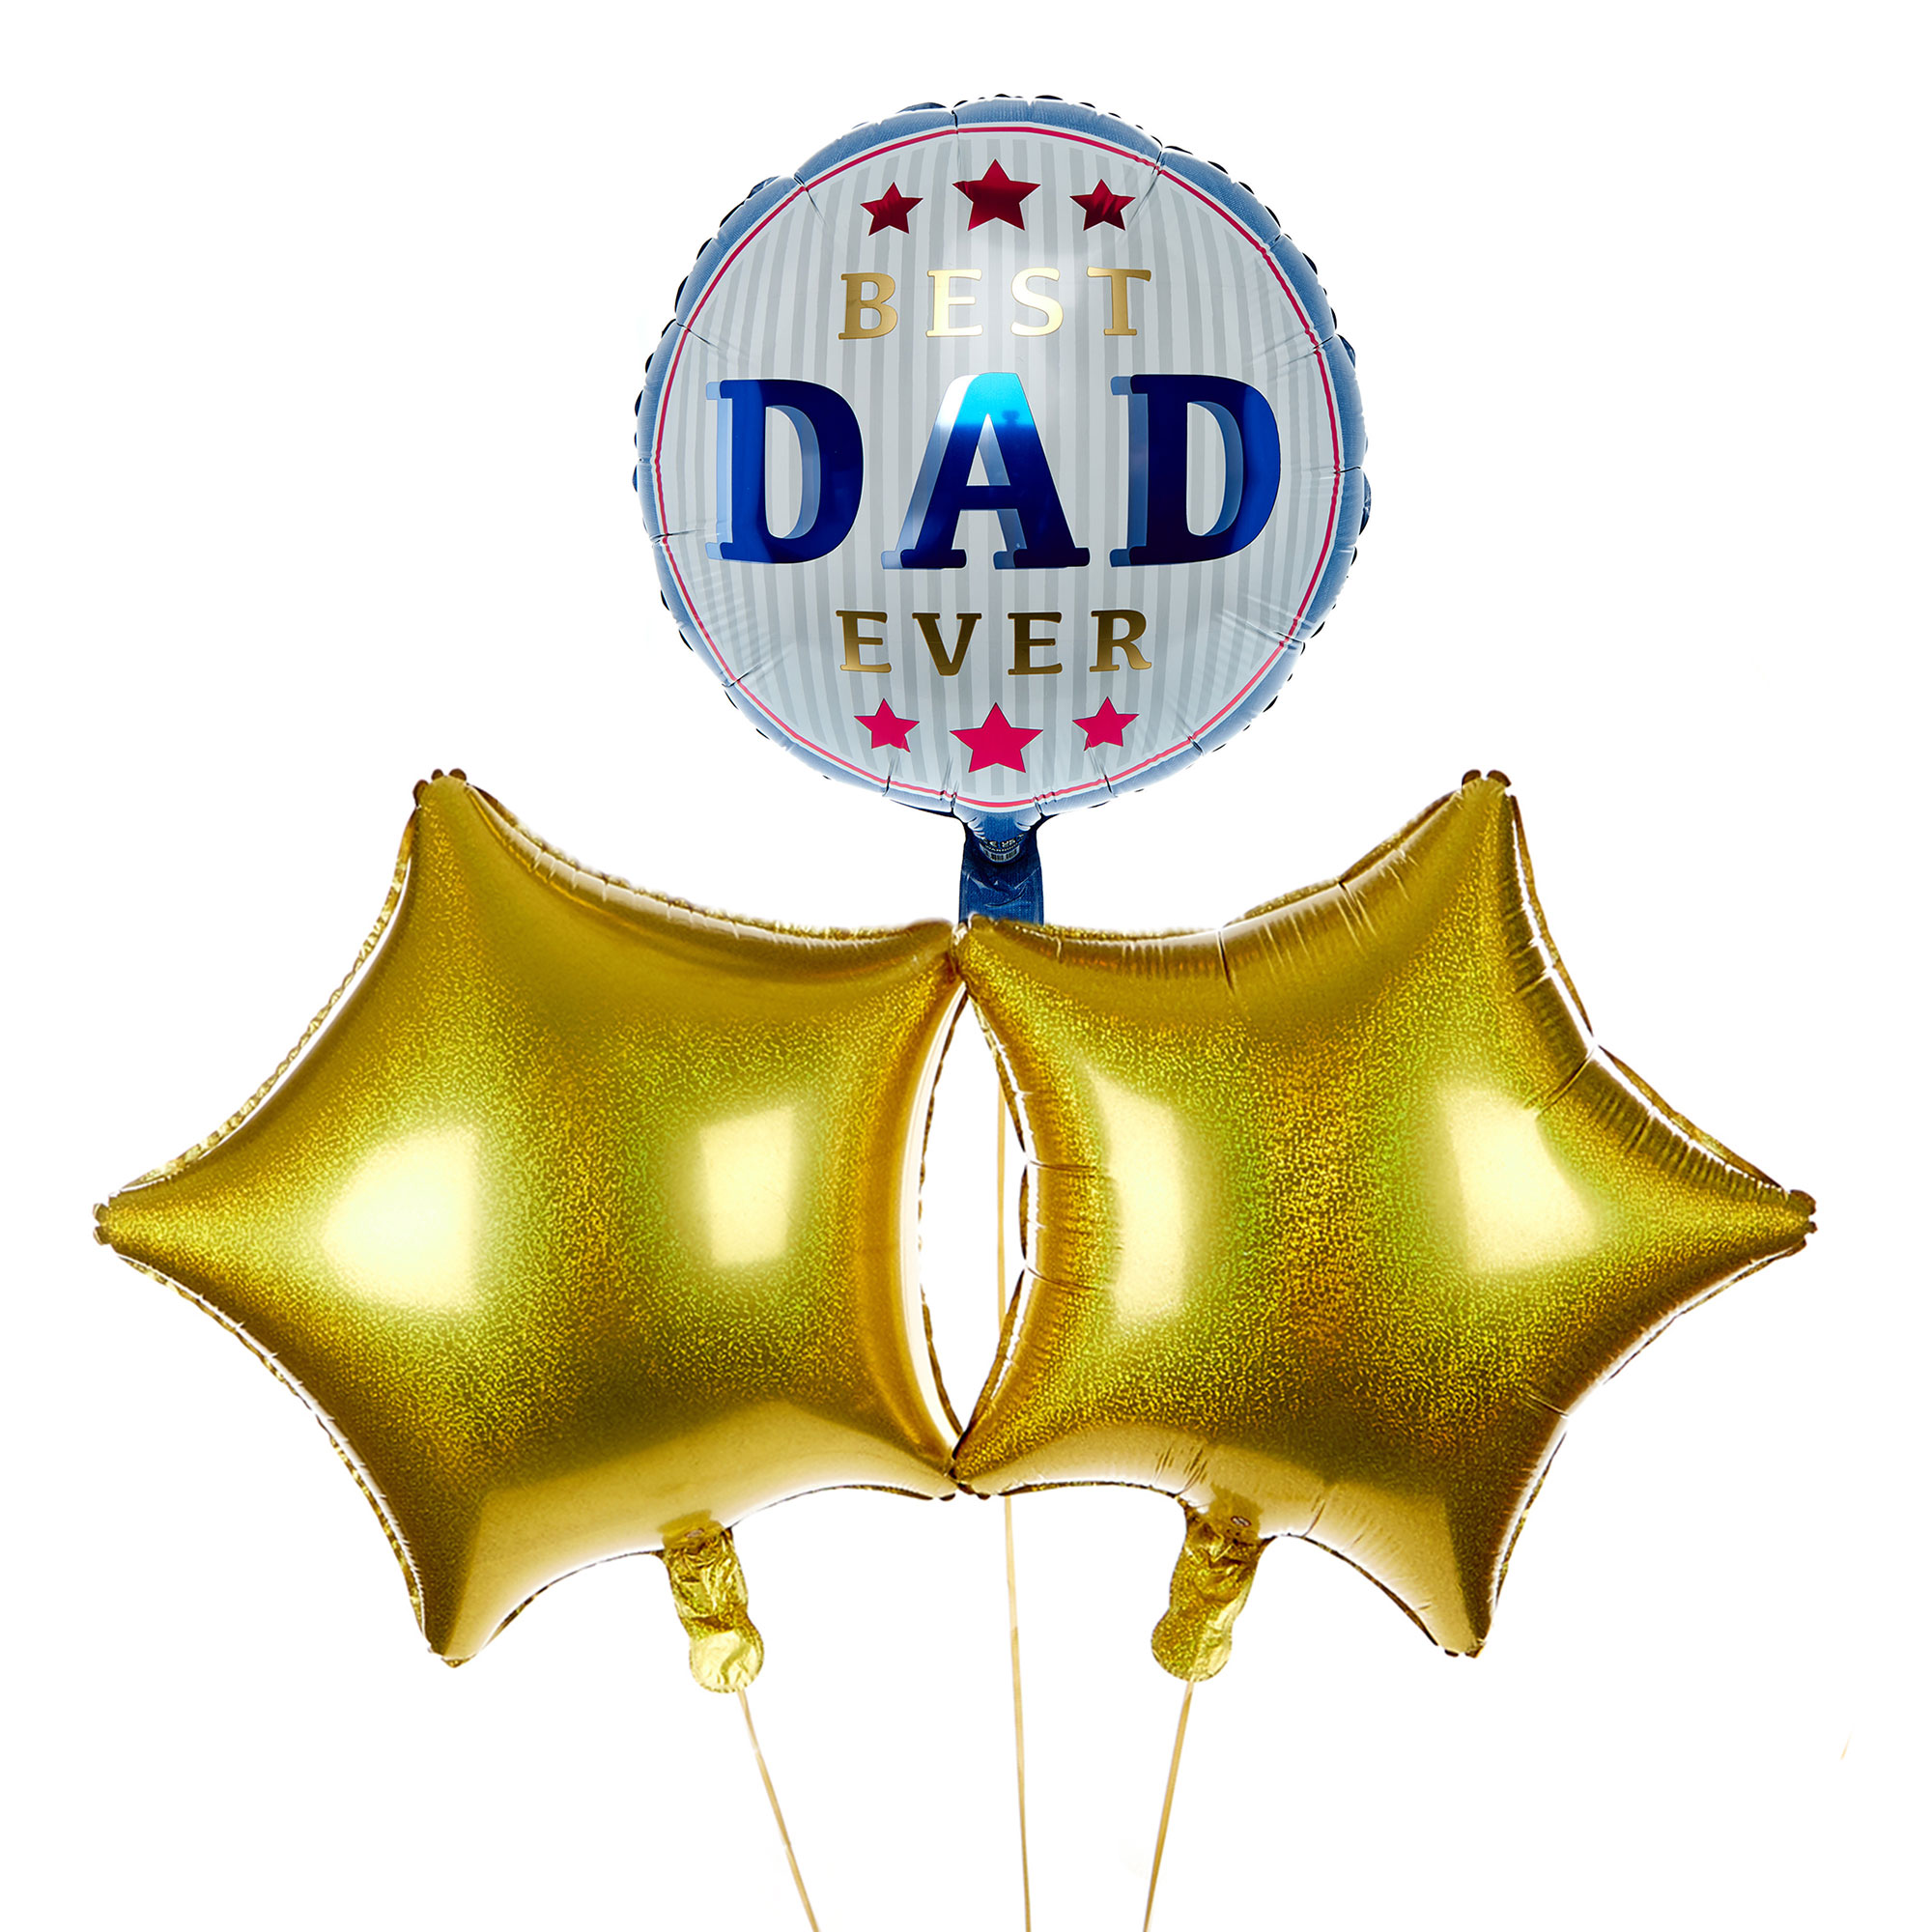 Best Dad Ever Balloon Bouquet - DELIVERED INFLATED!